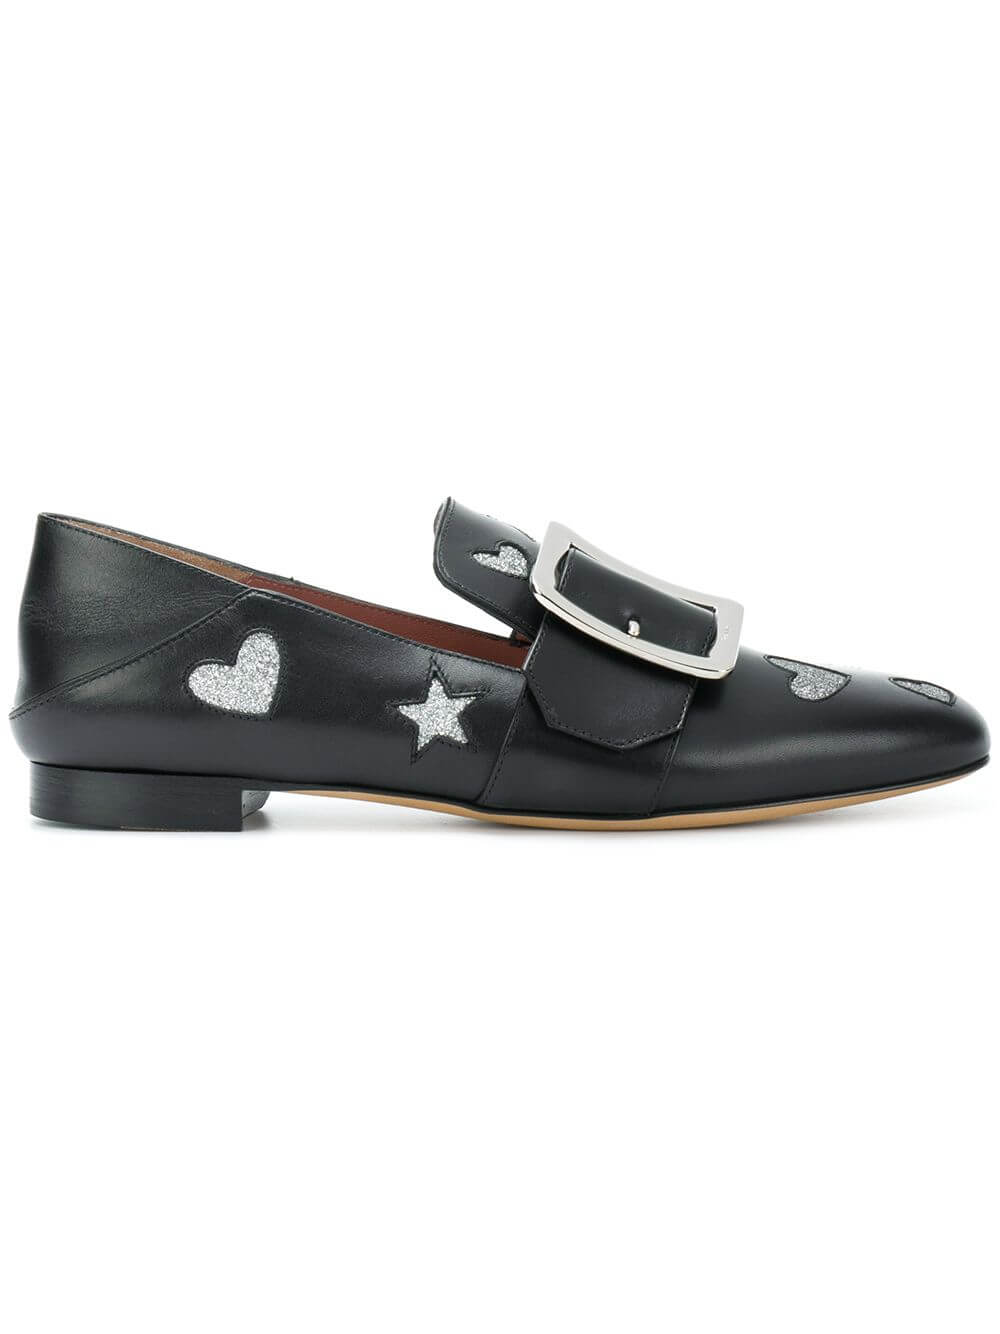 NEW Bally Janelle Hearts Women's 6221029 Black Leather Loafers US 6.5 MSRP $675